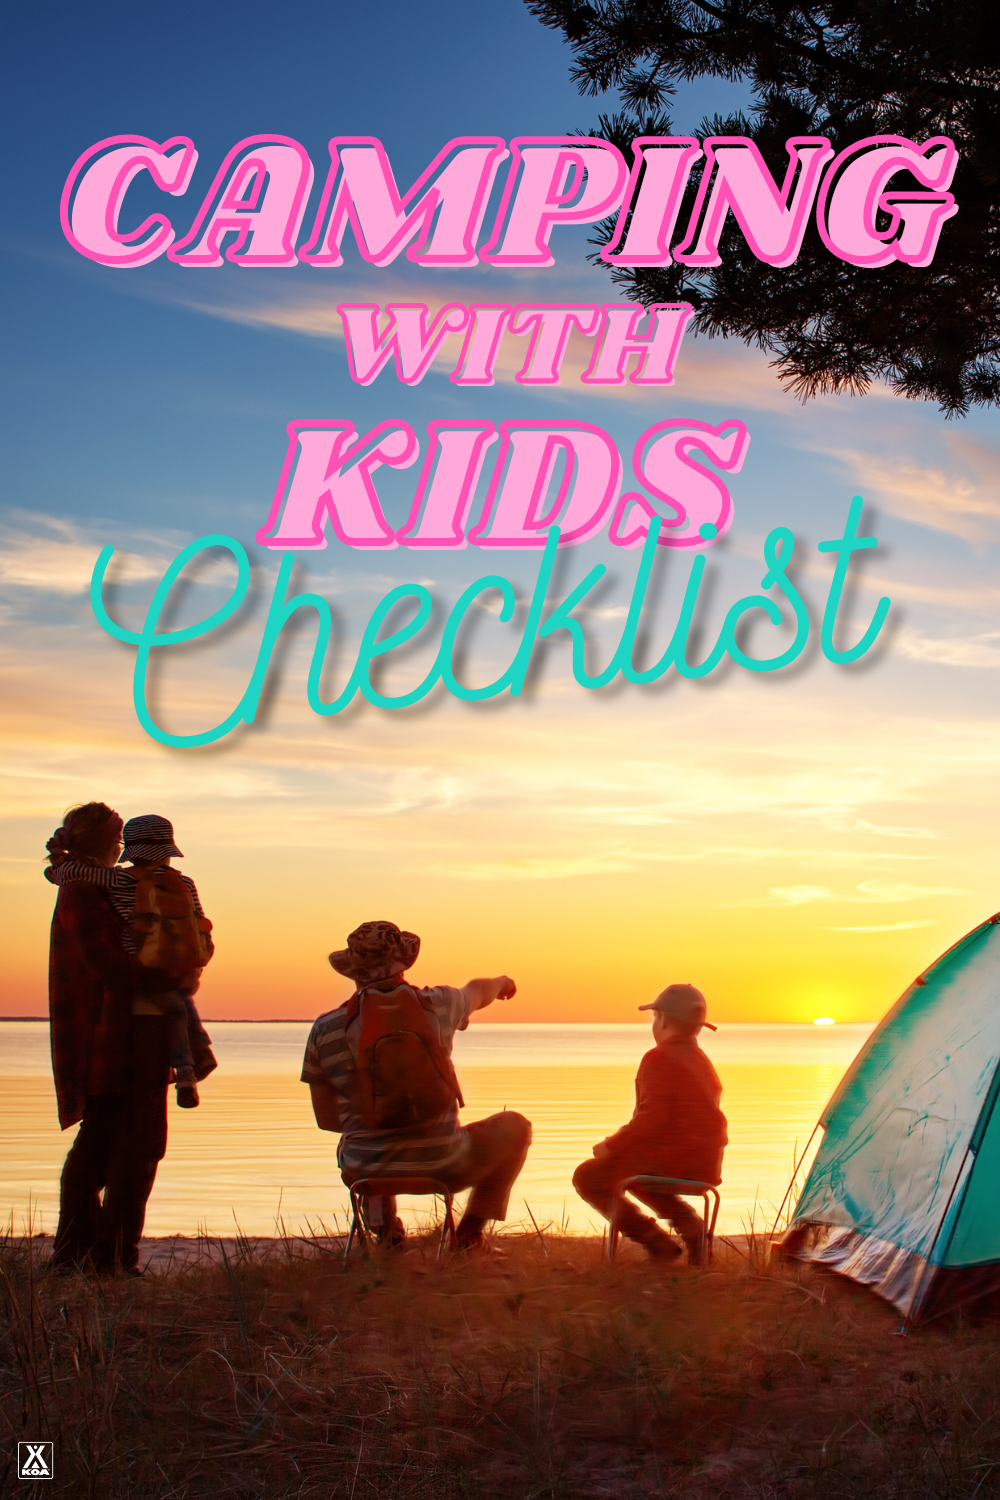 Check out our ultimate checklist for camping with kids, including a PDF download for easy planning on the go. Food ideas, essentials to pack, tips & more!